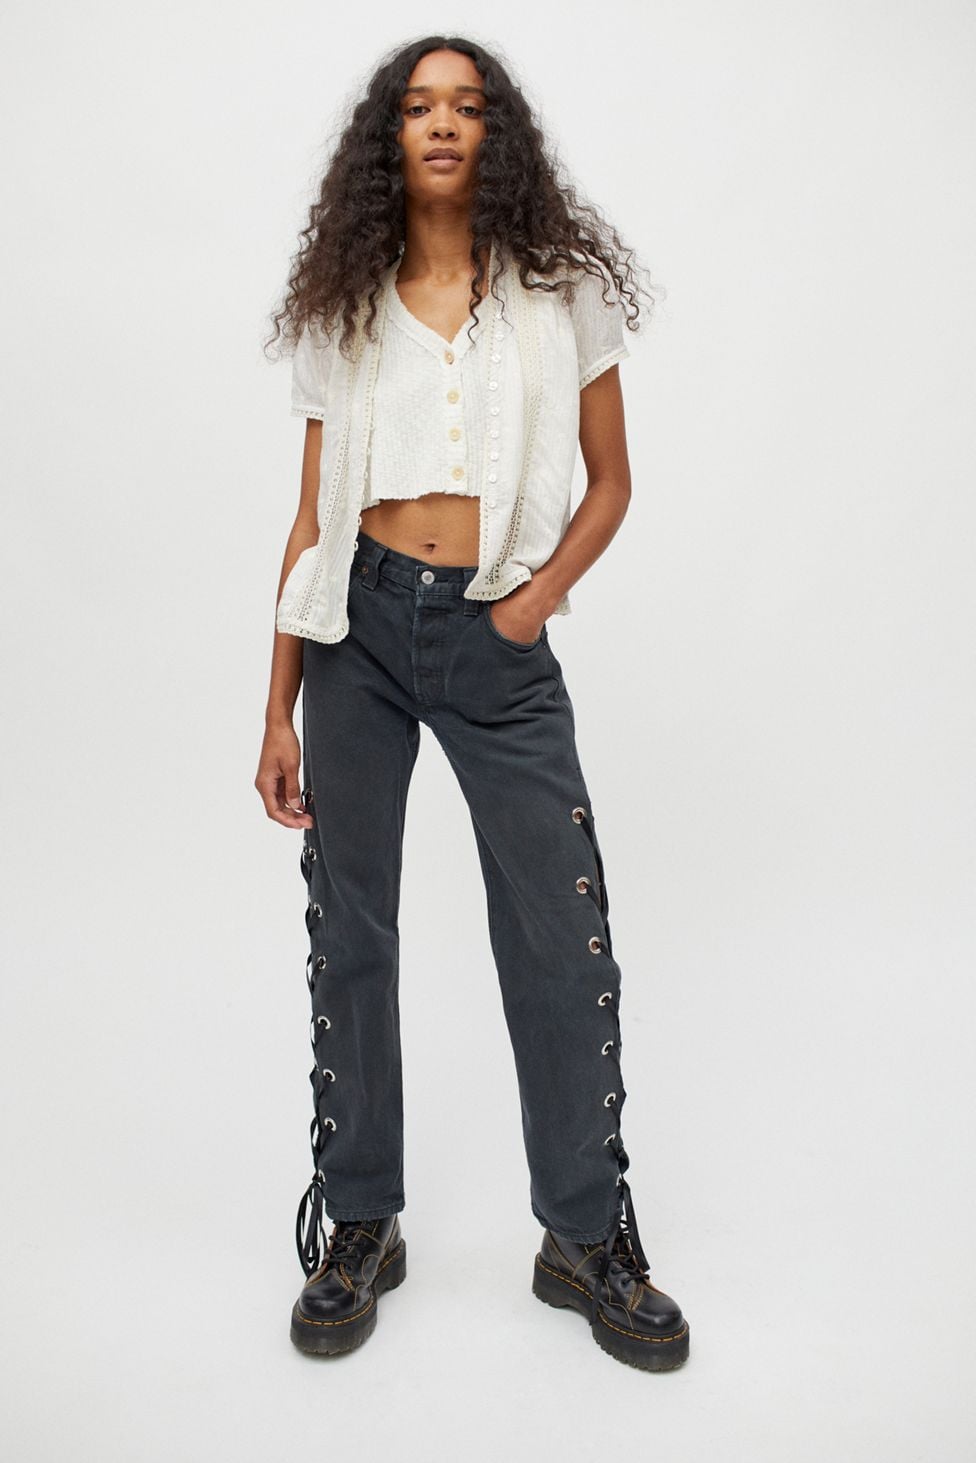 Urban Renewal Recycled Levi's Side Lace-Up Jean | Vintage Jeans: Where to  Shop the Denim Archives Plus 22 Rare Finds We Love | POPSUGAR Fashion Photo  8